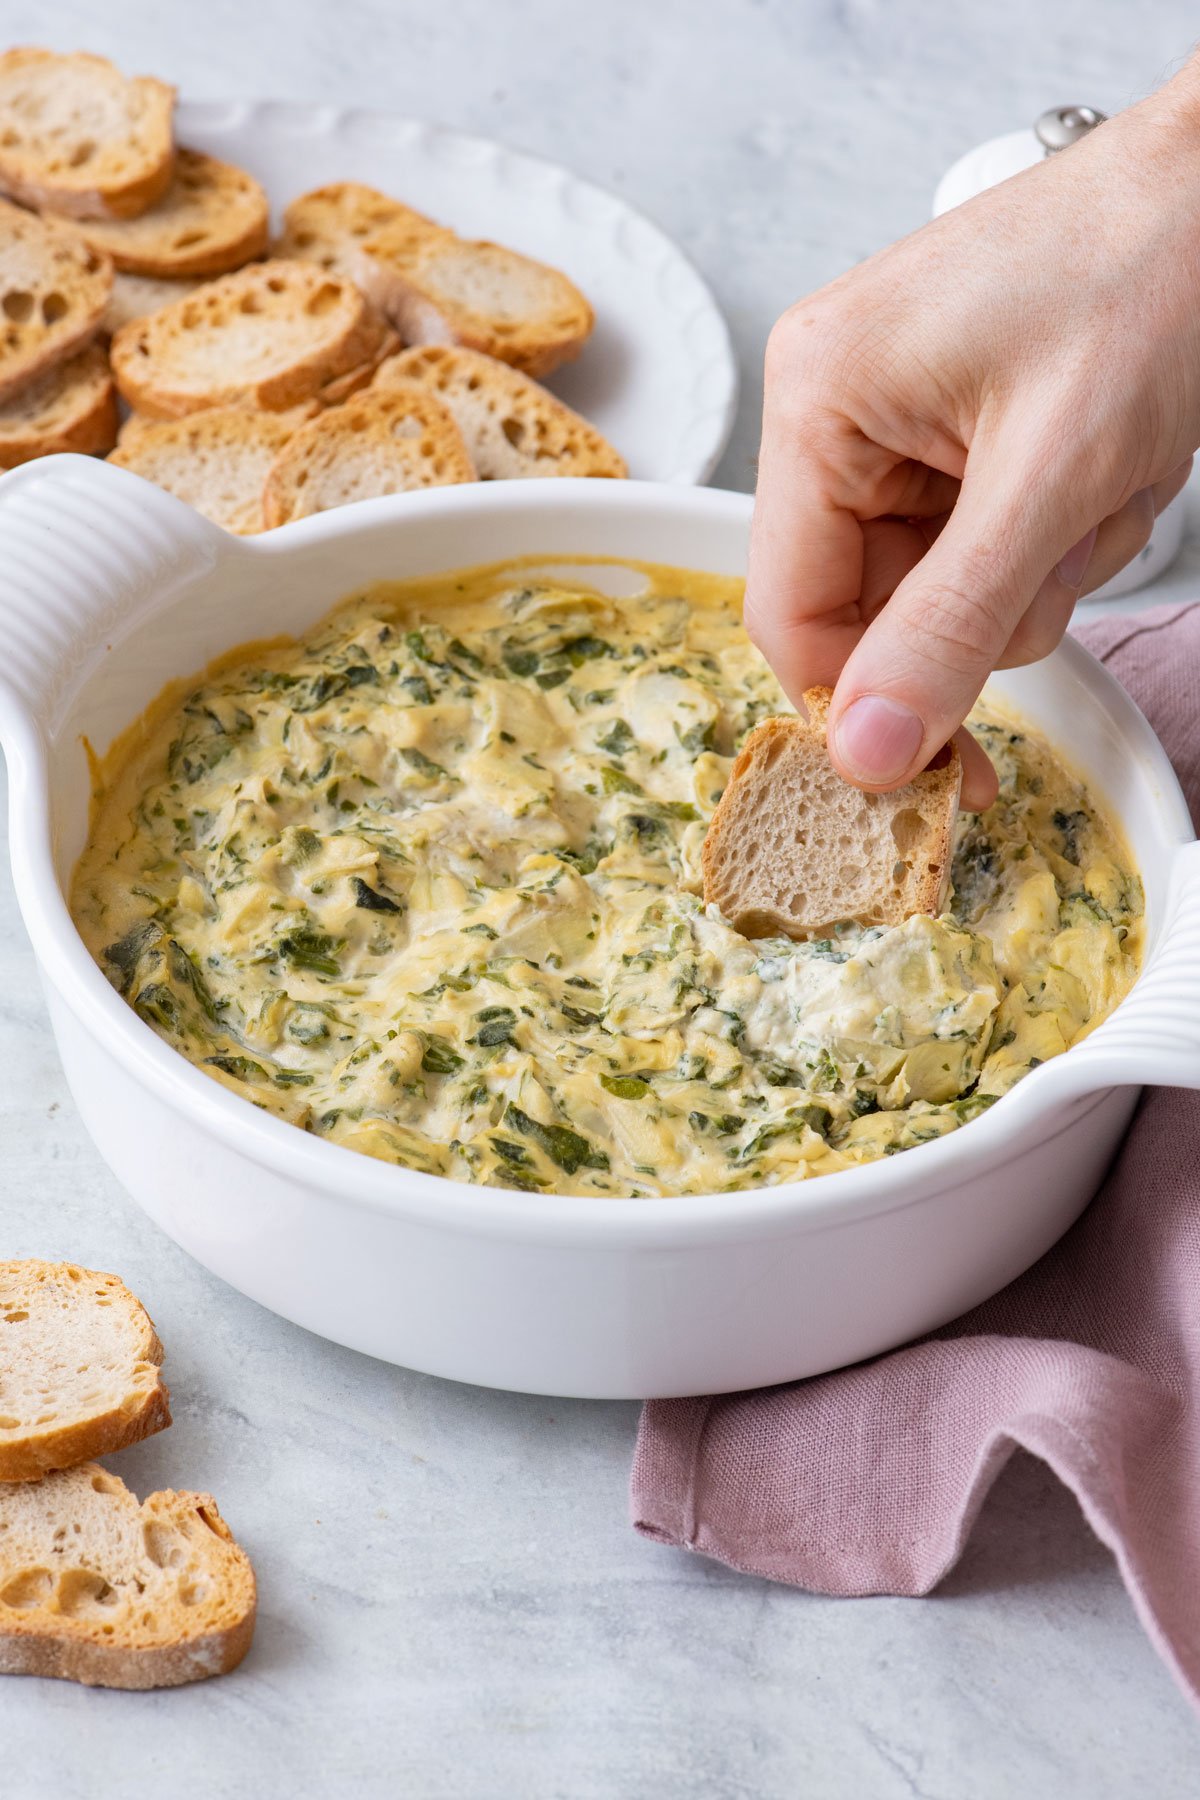 Small toast dipping into warm vegan spinach artichoke dip in round white casserole dish with more toasts nearby.